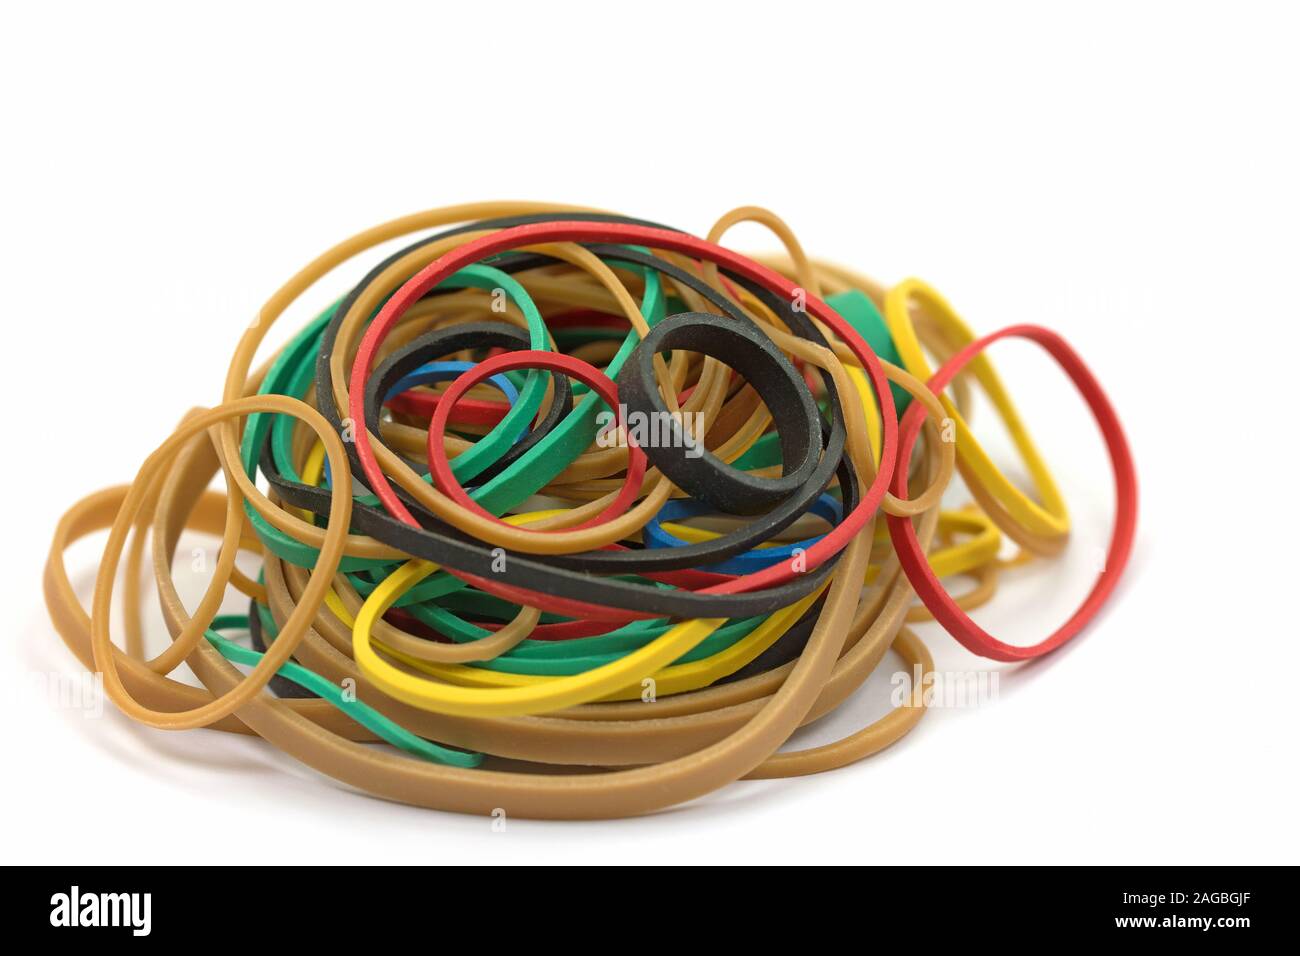 Many colorful rubber bands against a white background Stock Photo